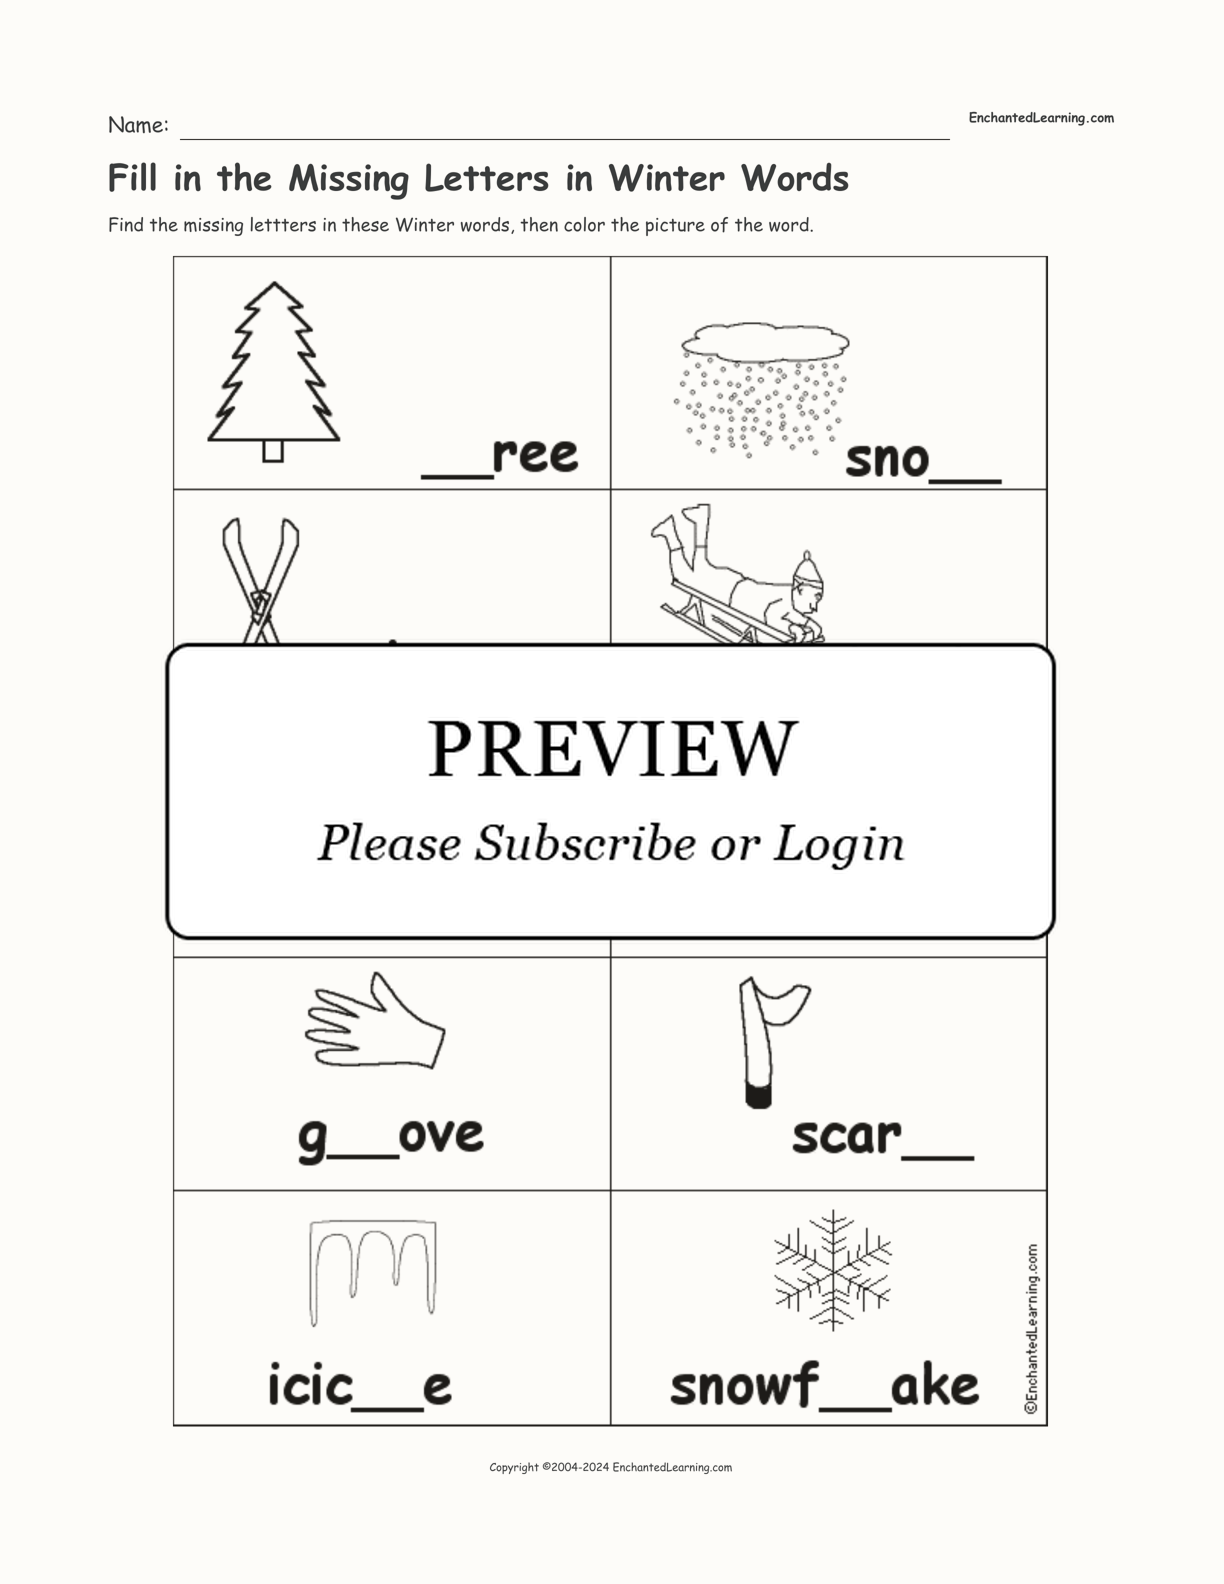 Fill in the Missing Letters in Winter Words interactive worksheet page 1